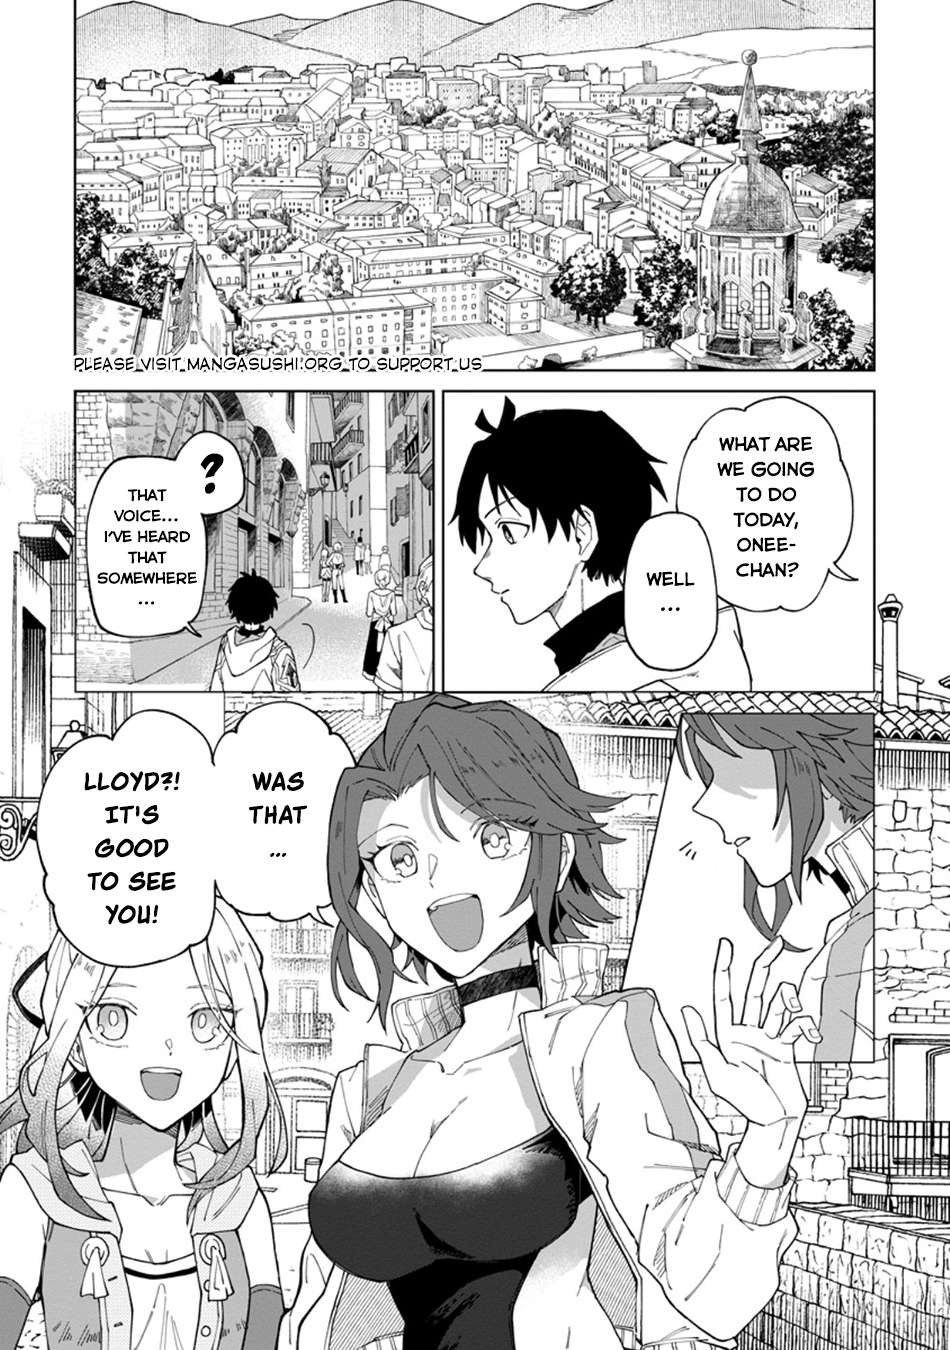 The White Mage Who Was Banished From the Hero's Party - chapter 30.1 - #6